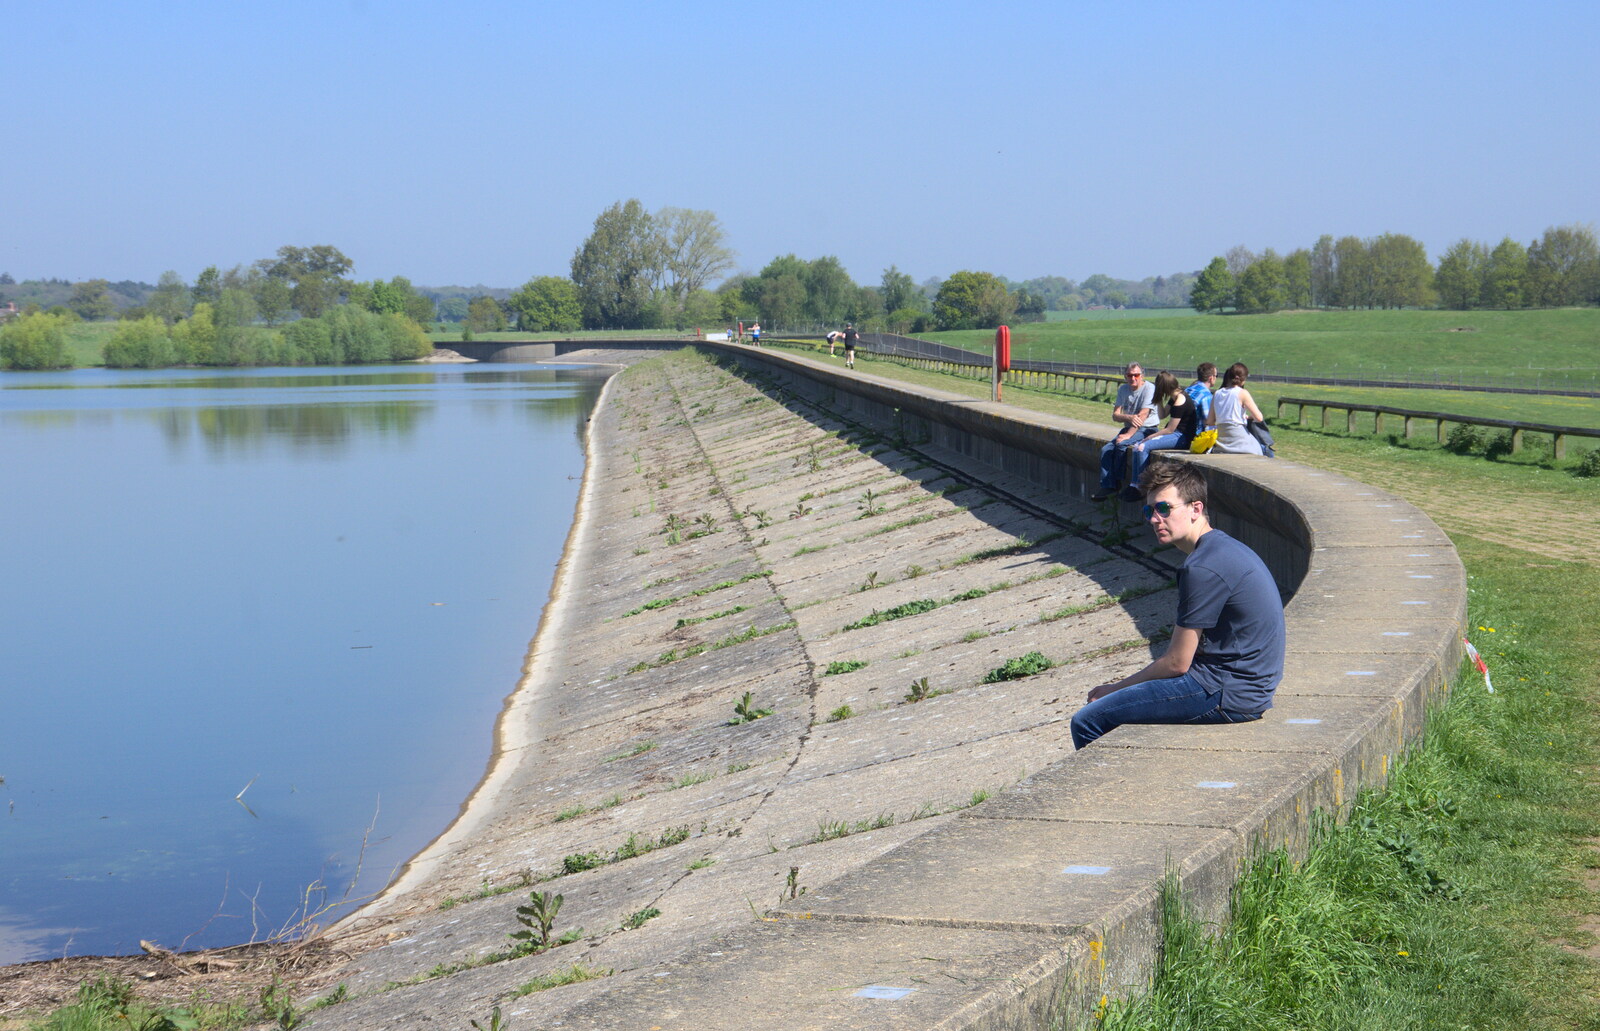 Some dude sits on the dam from Isobel's 10km Run, Alton Water, Stutton, Suffolk - 6th May 2018